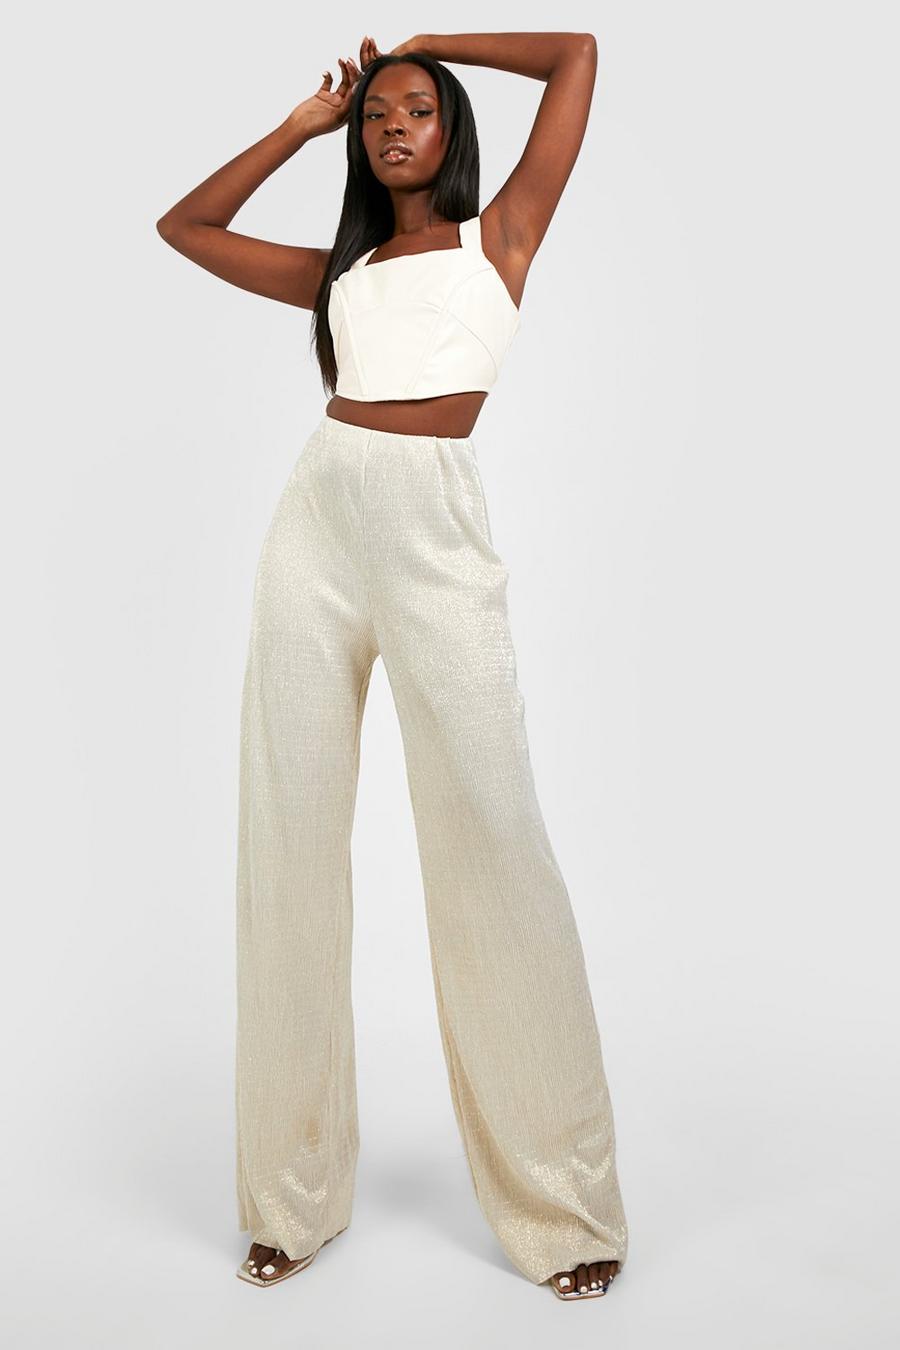 Champagne Metallic Plisse High Waisted Full Length Trousers